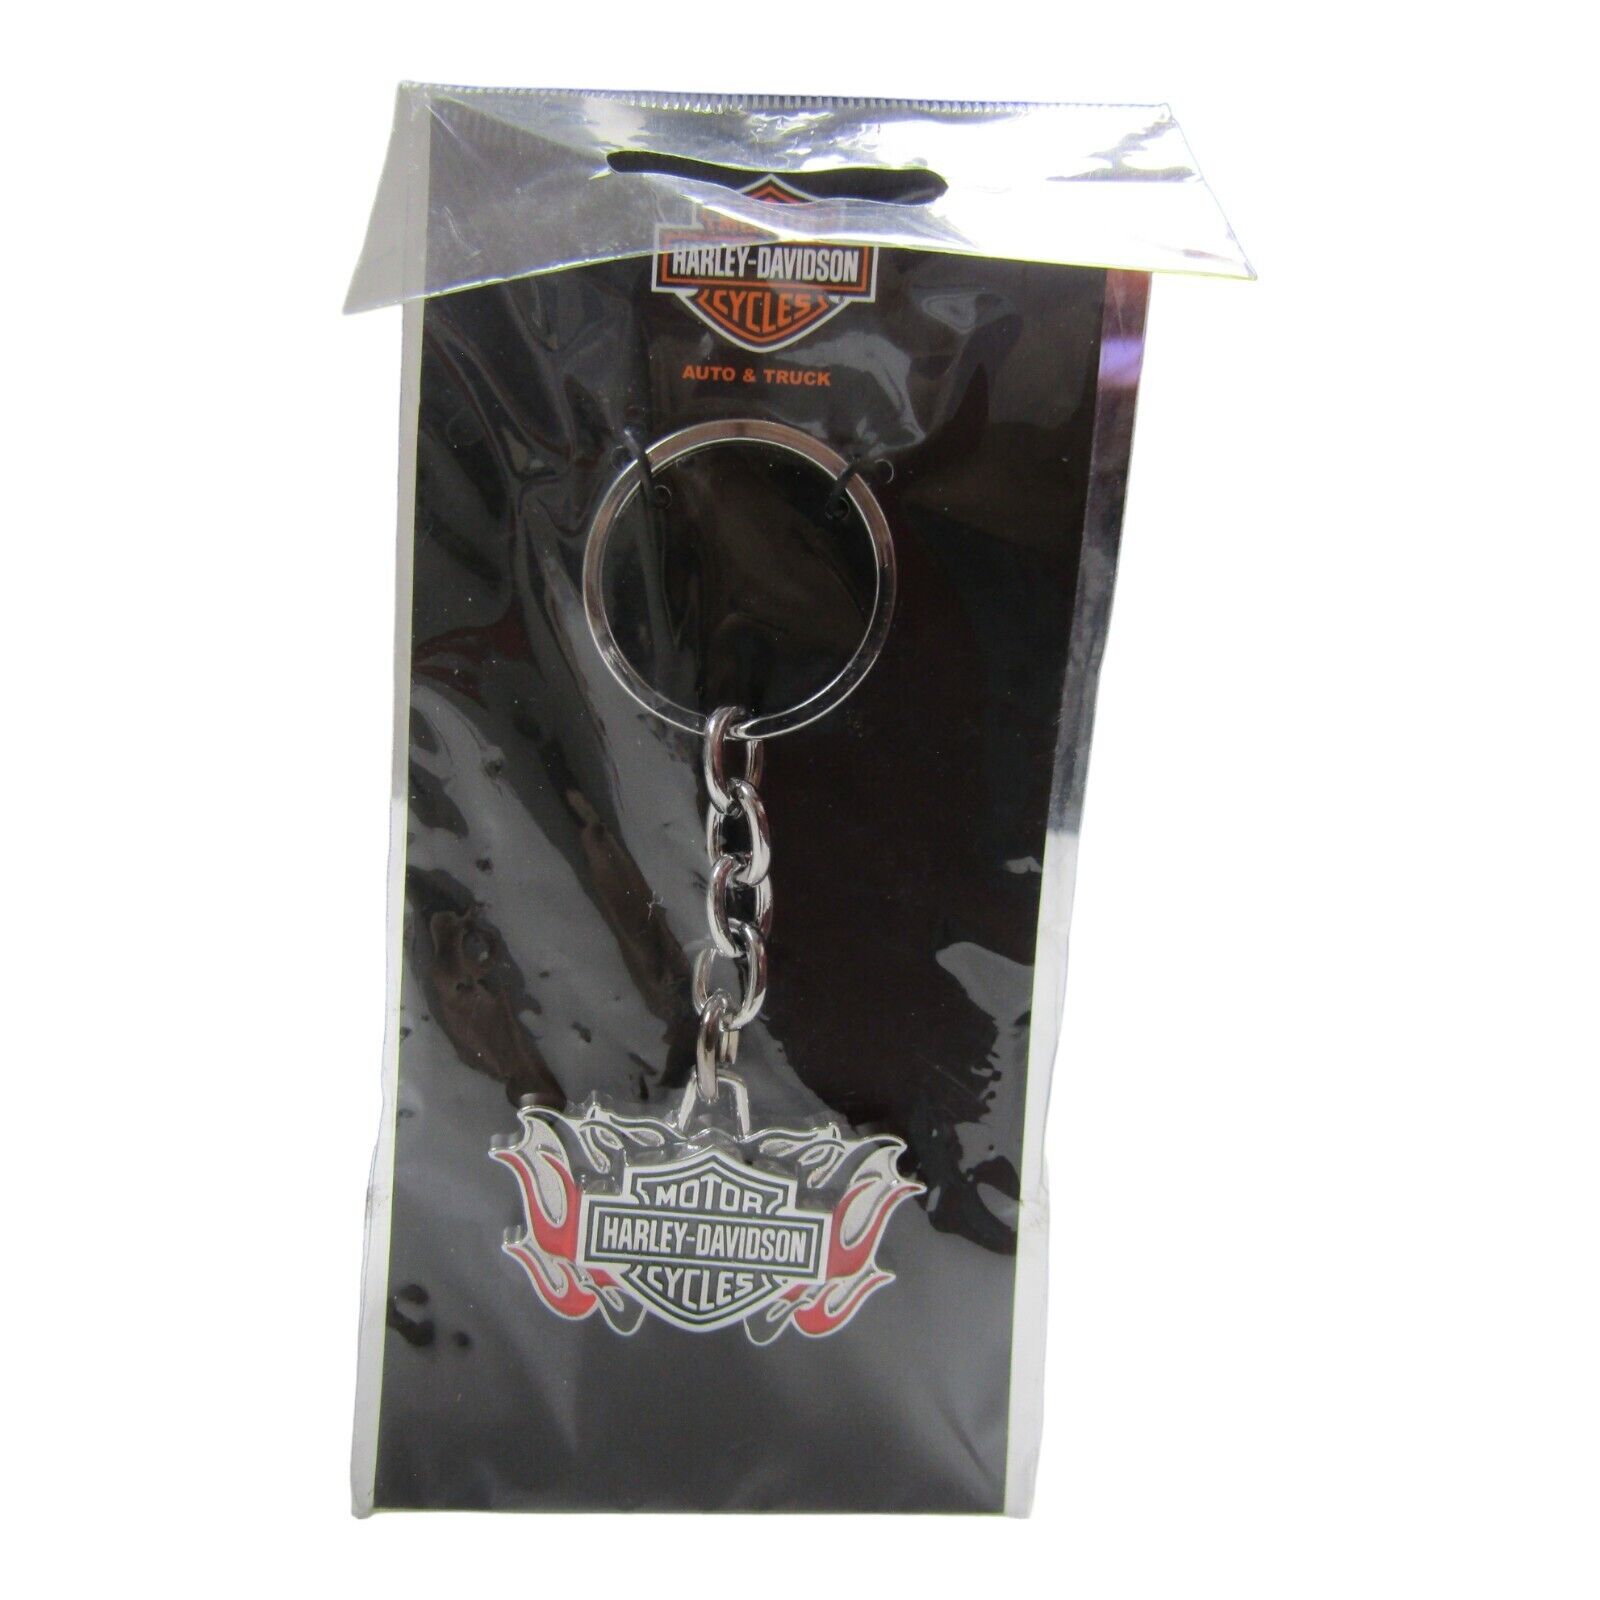 2018 Harley-Davidson Motor Cycles Key Chain B &S w Flames Red & Black New Sealed